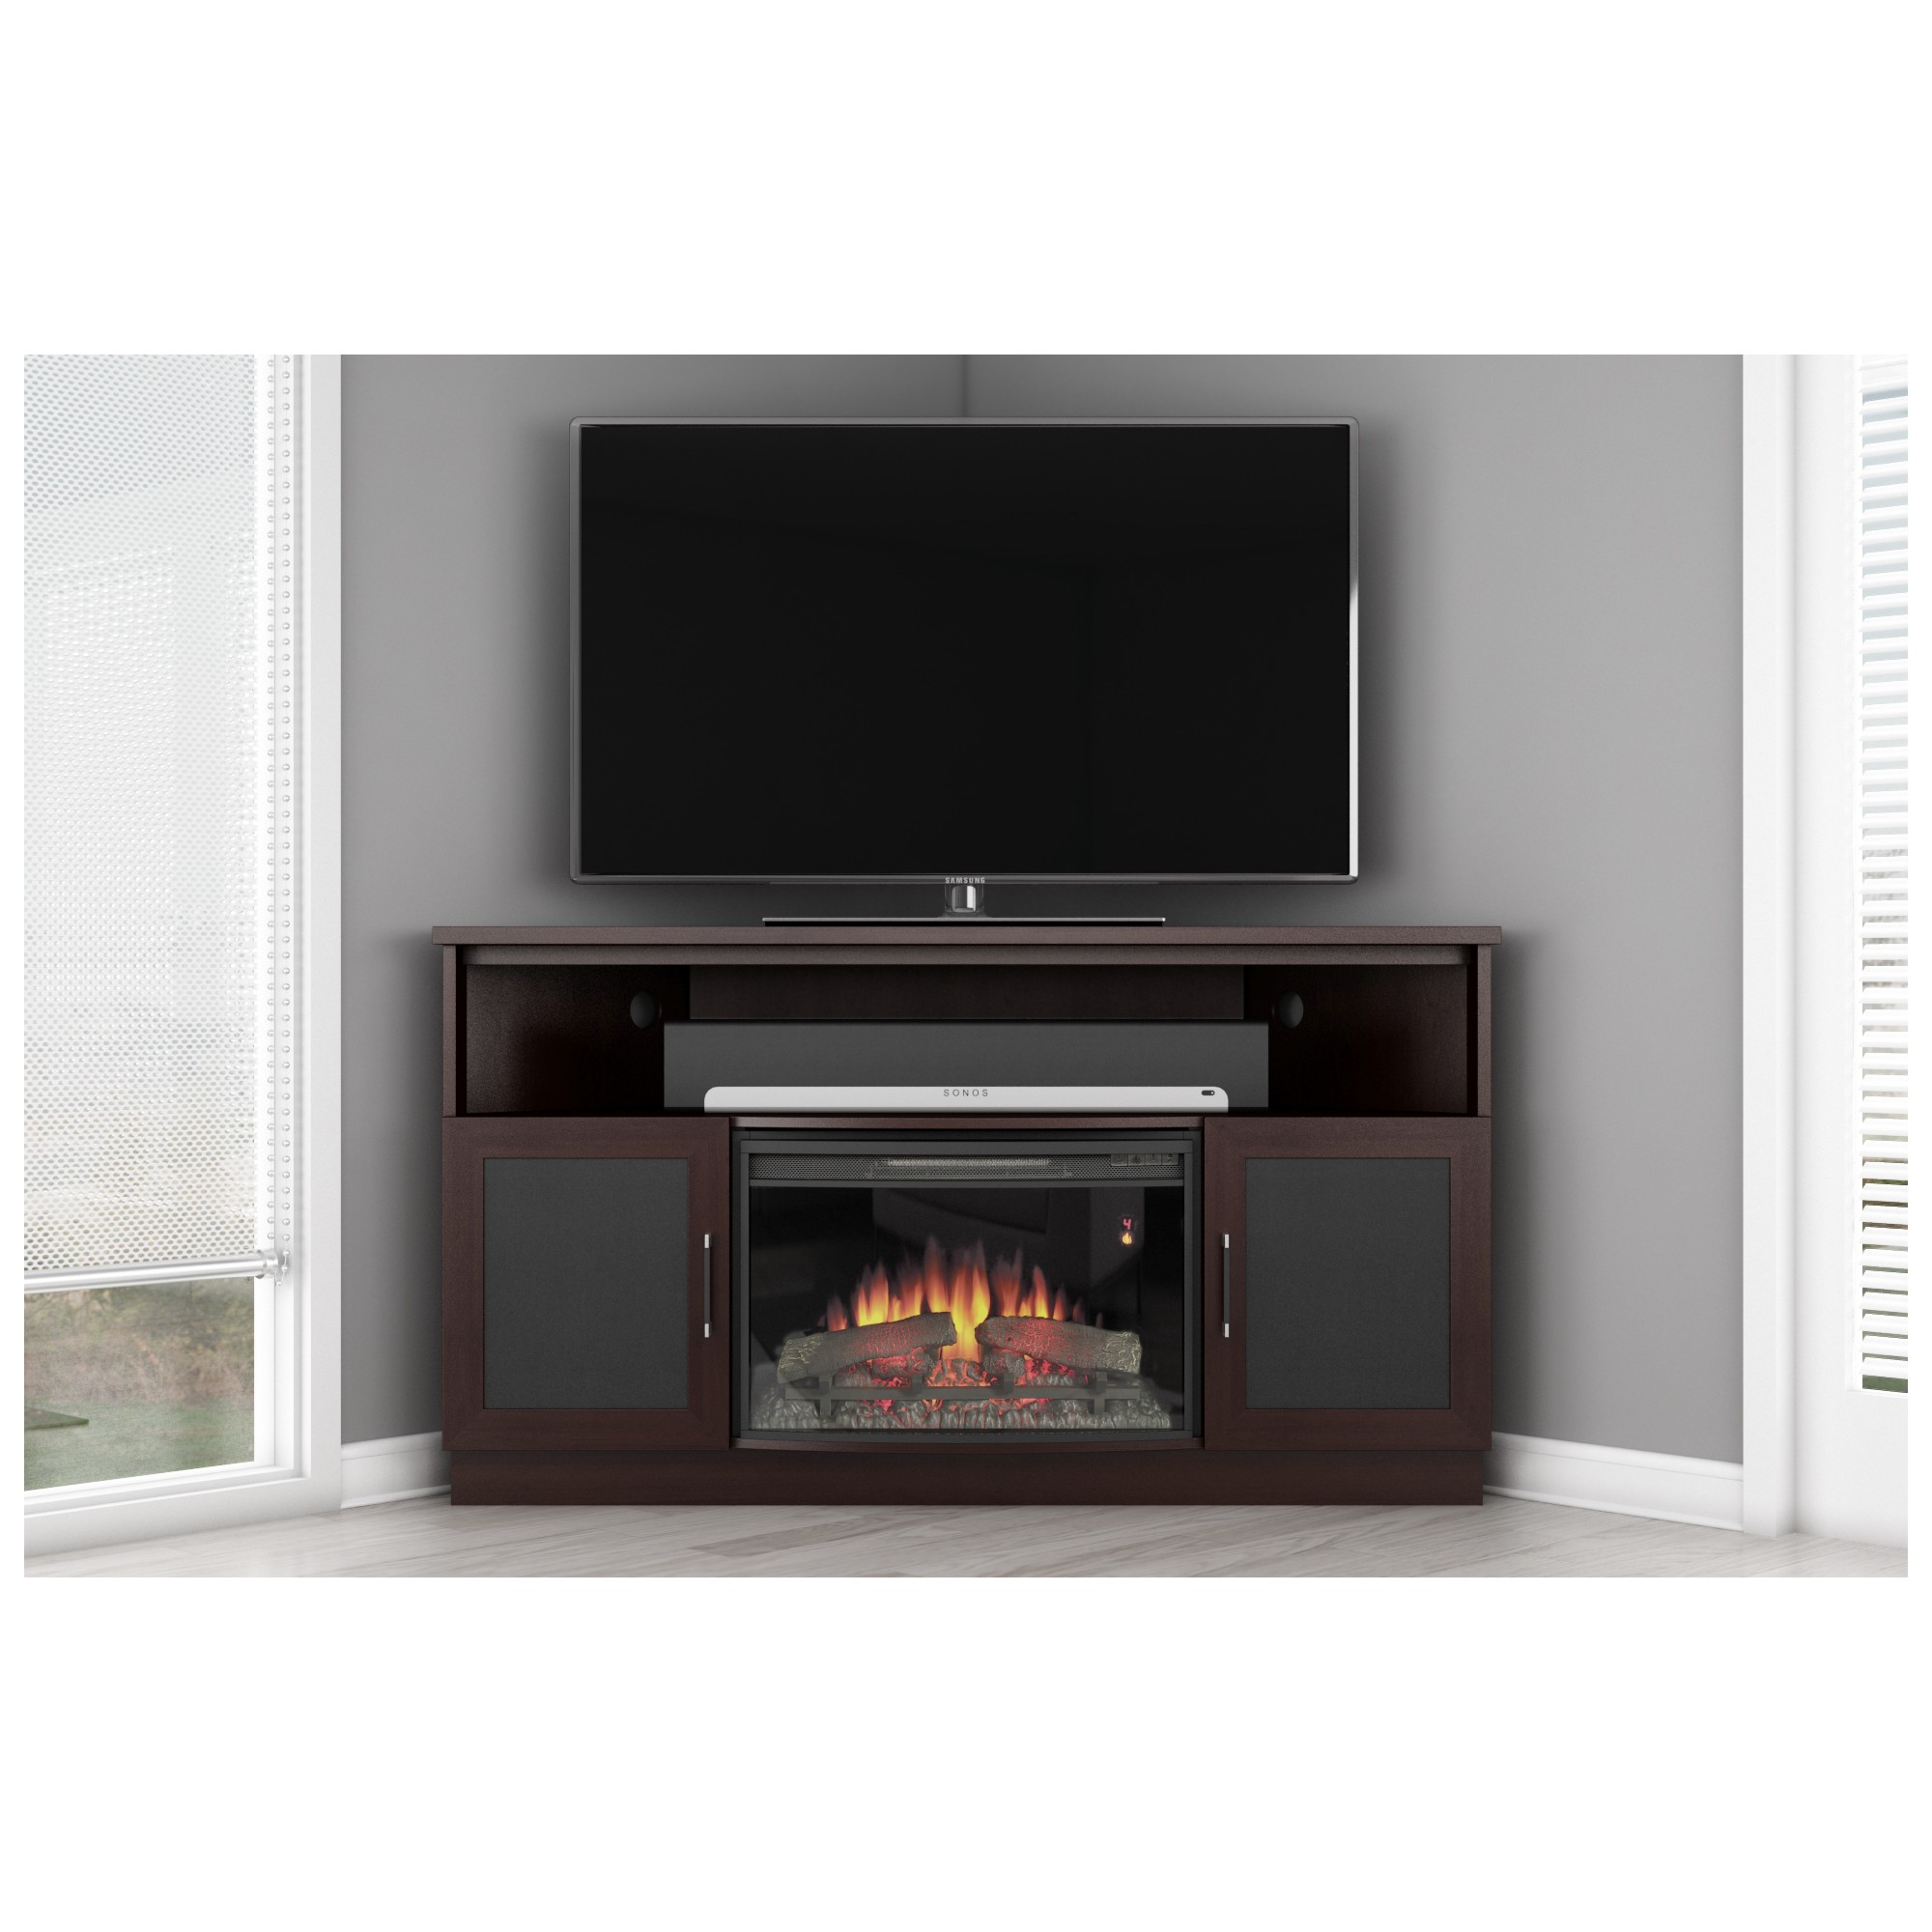 Furnitech FT60CCCFB 60 Inch TV Stand Contemporary Corner w/ Electric Fireplace Wenge Furnitech-FT60CCCFB